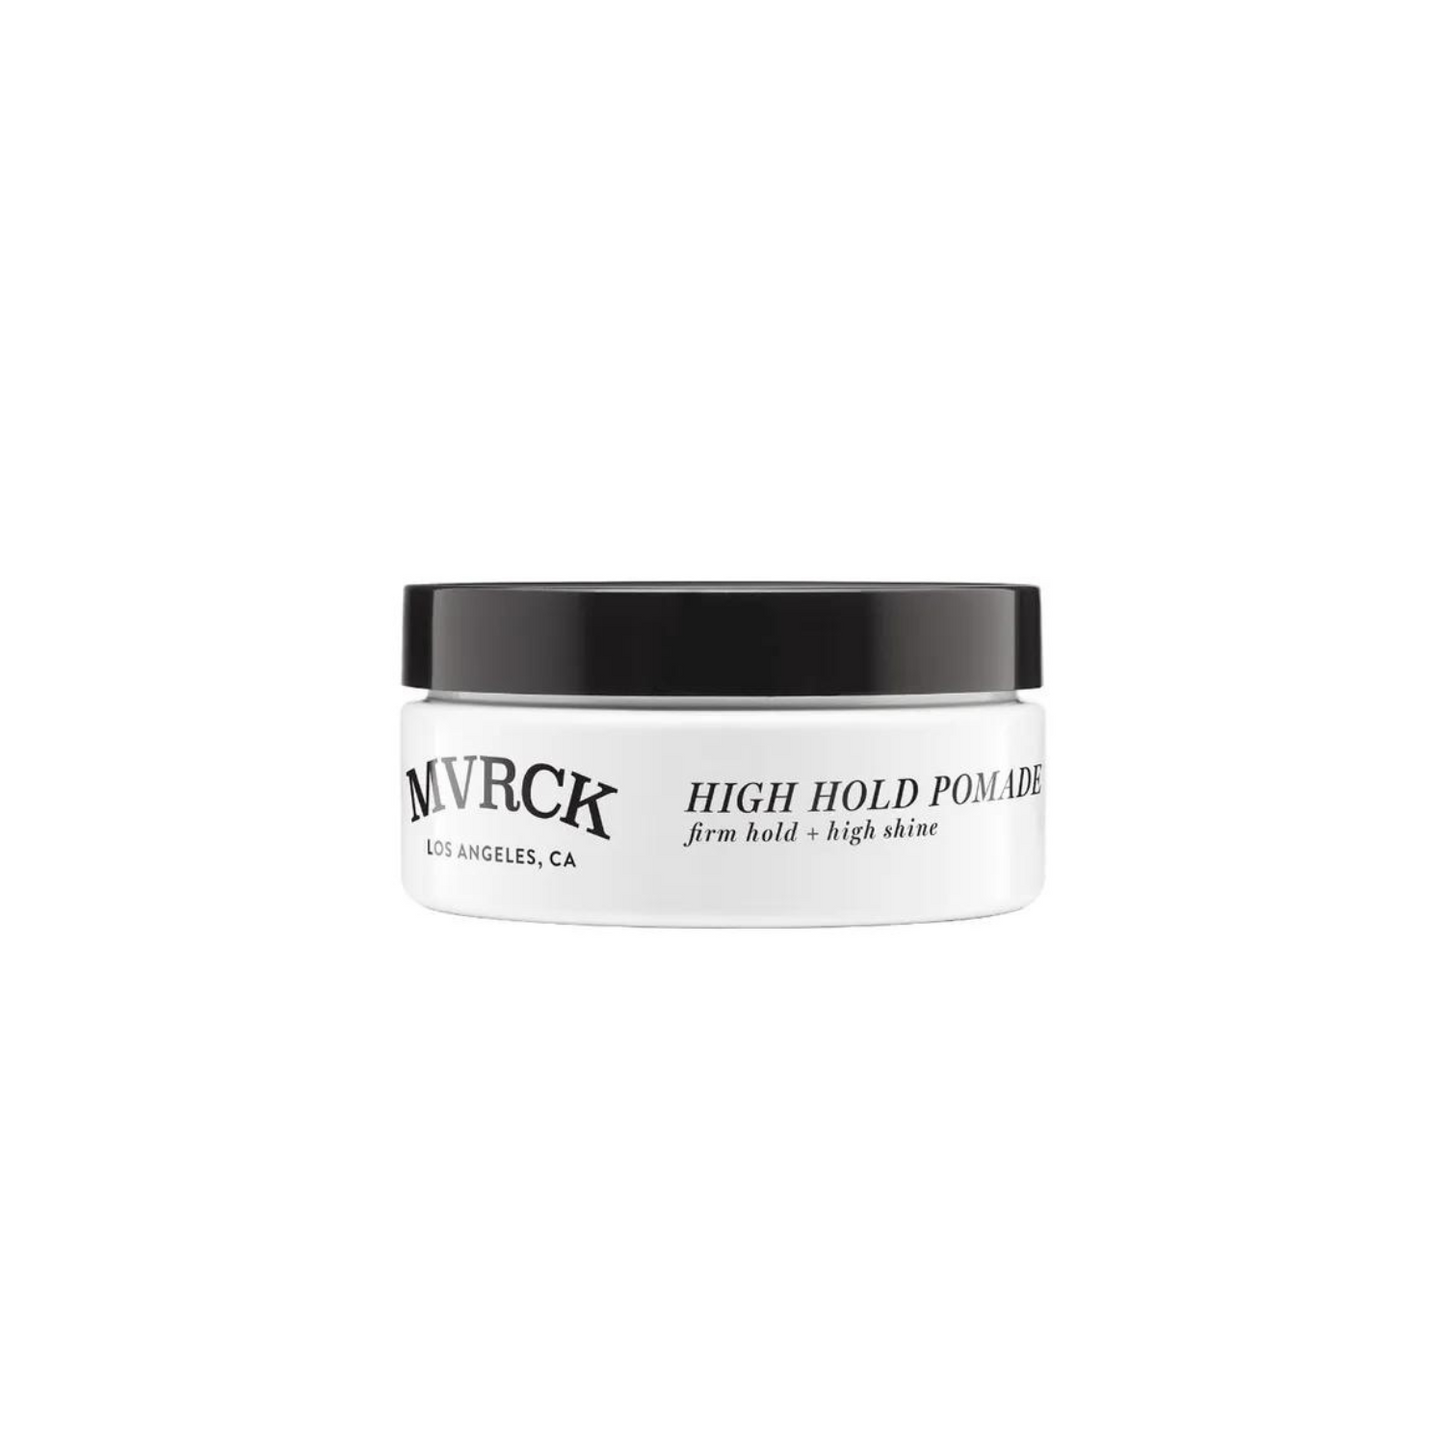 Paul Mitchell MVRCK -  High Hold Pomade